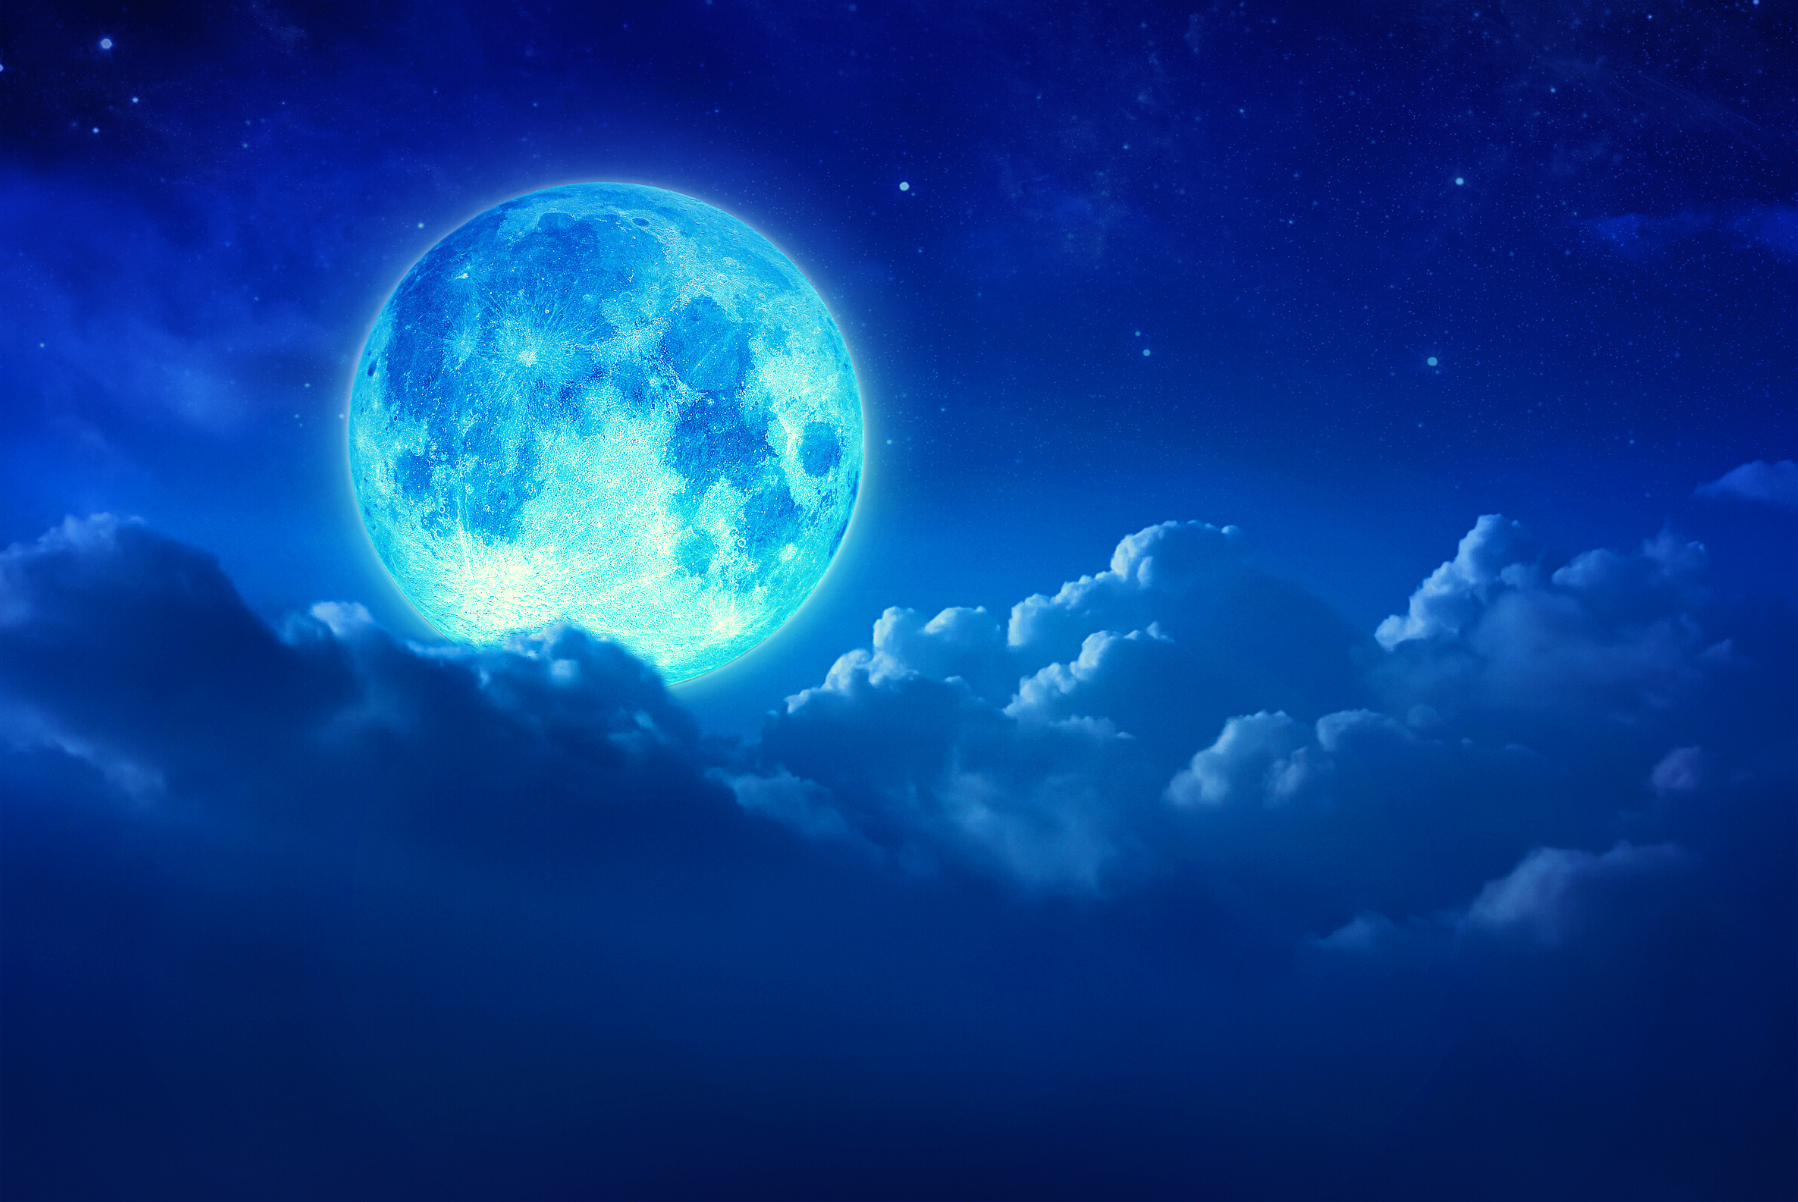 The August Blue Moon is the Best Full Moon of the Year